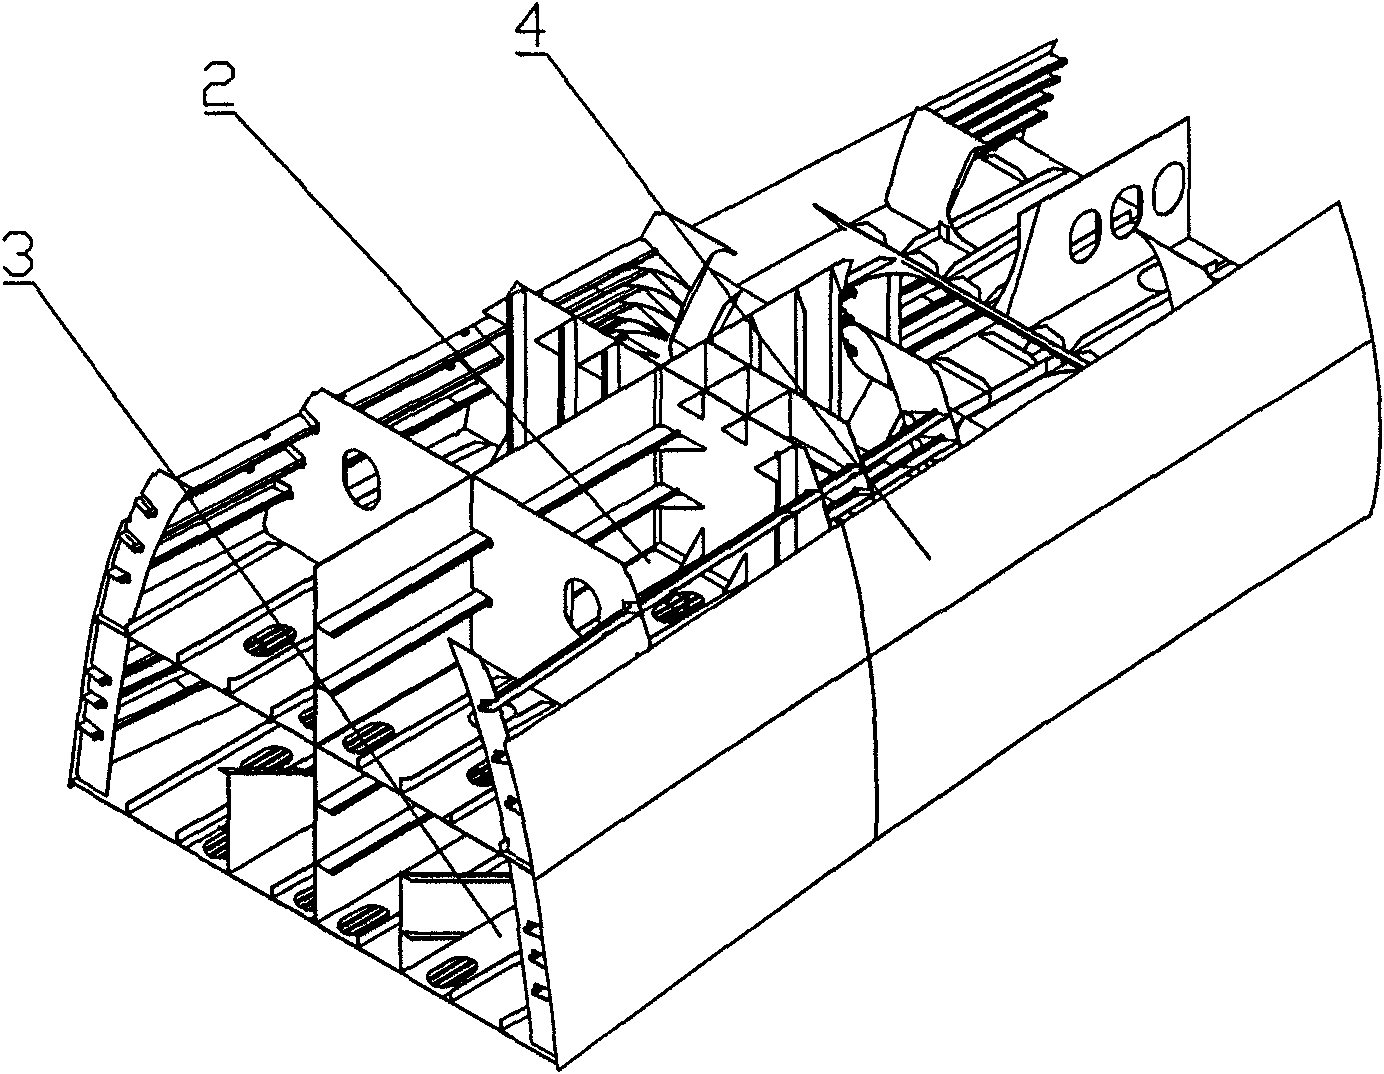 Process for pre-assembling bow thrustor on ship body section